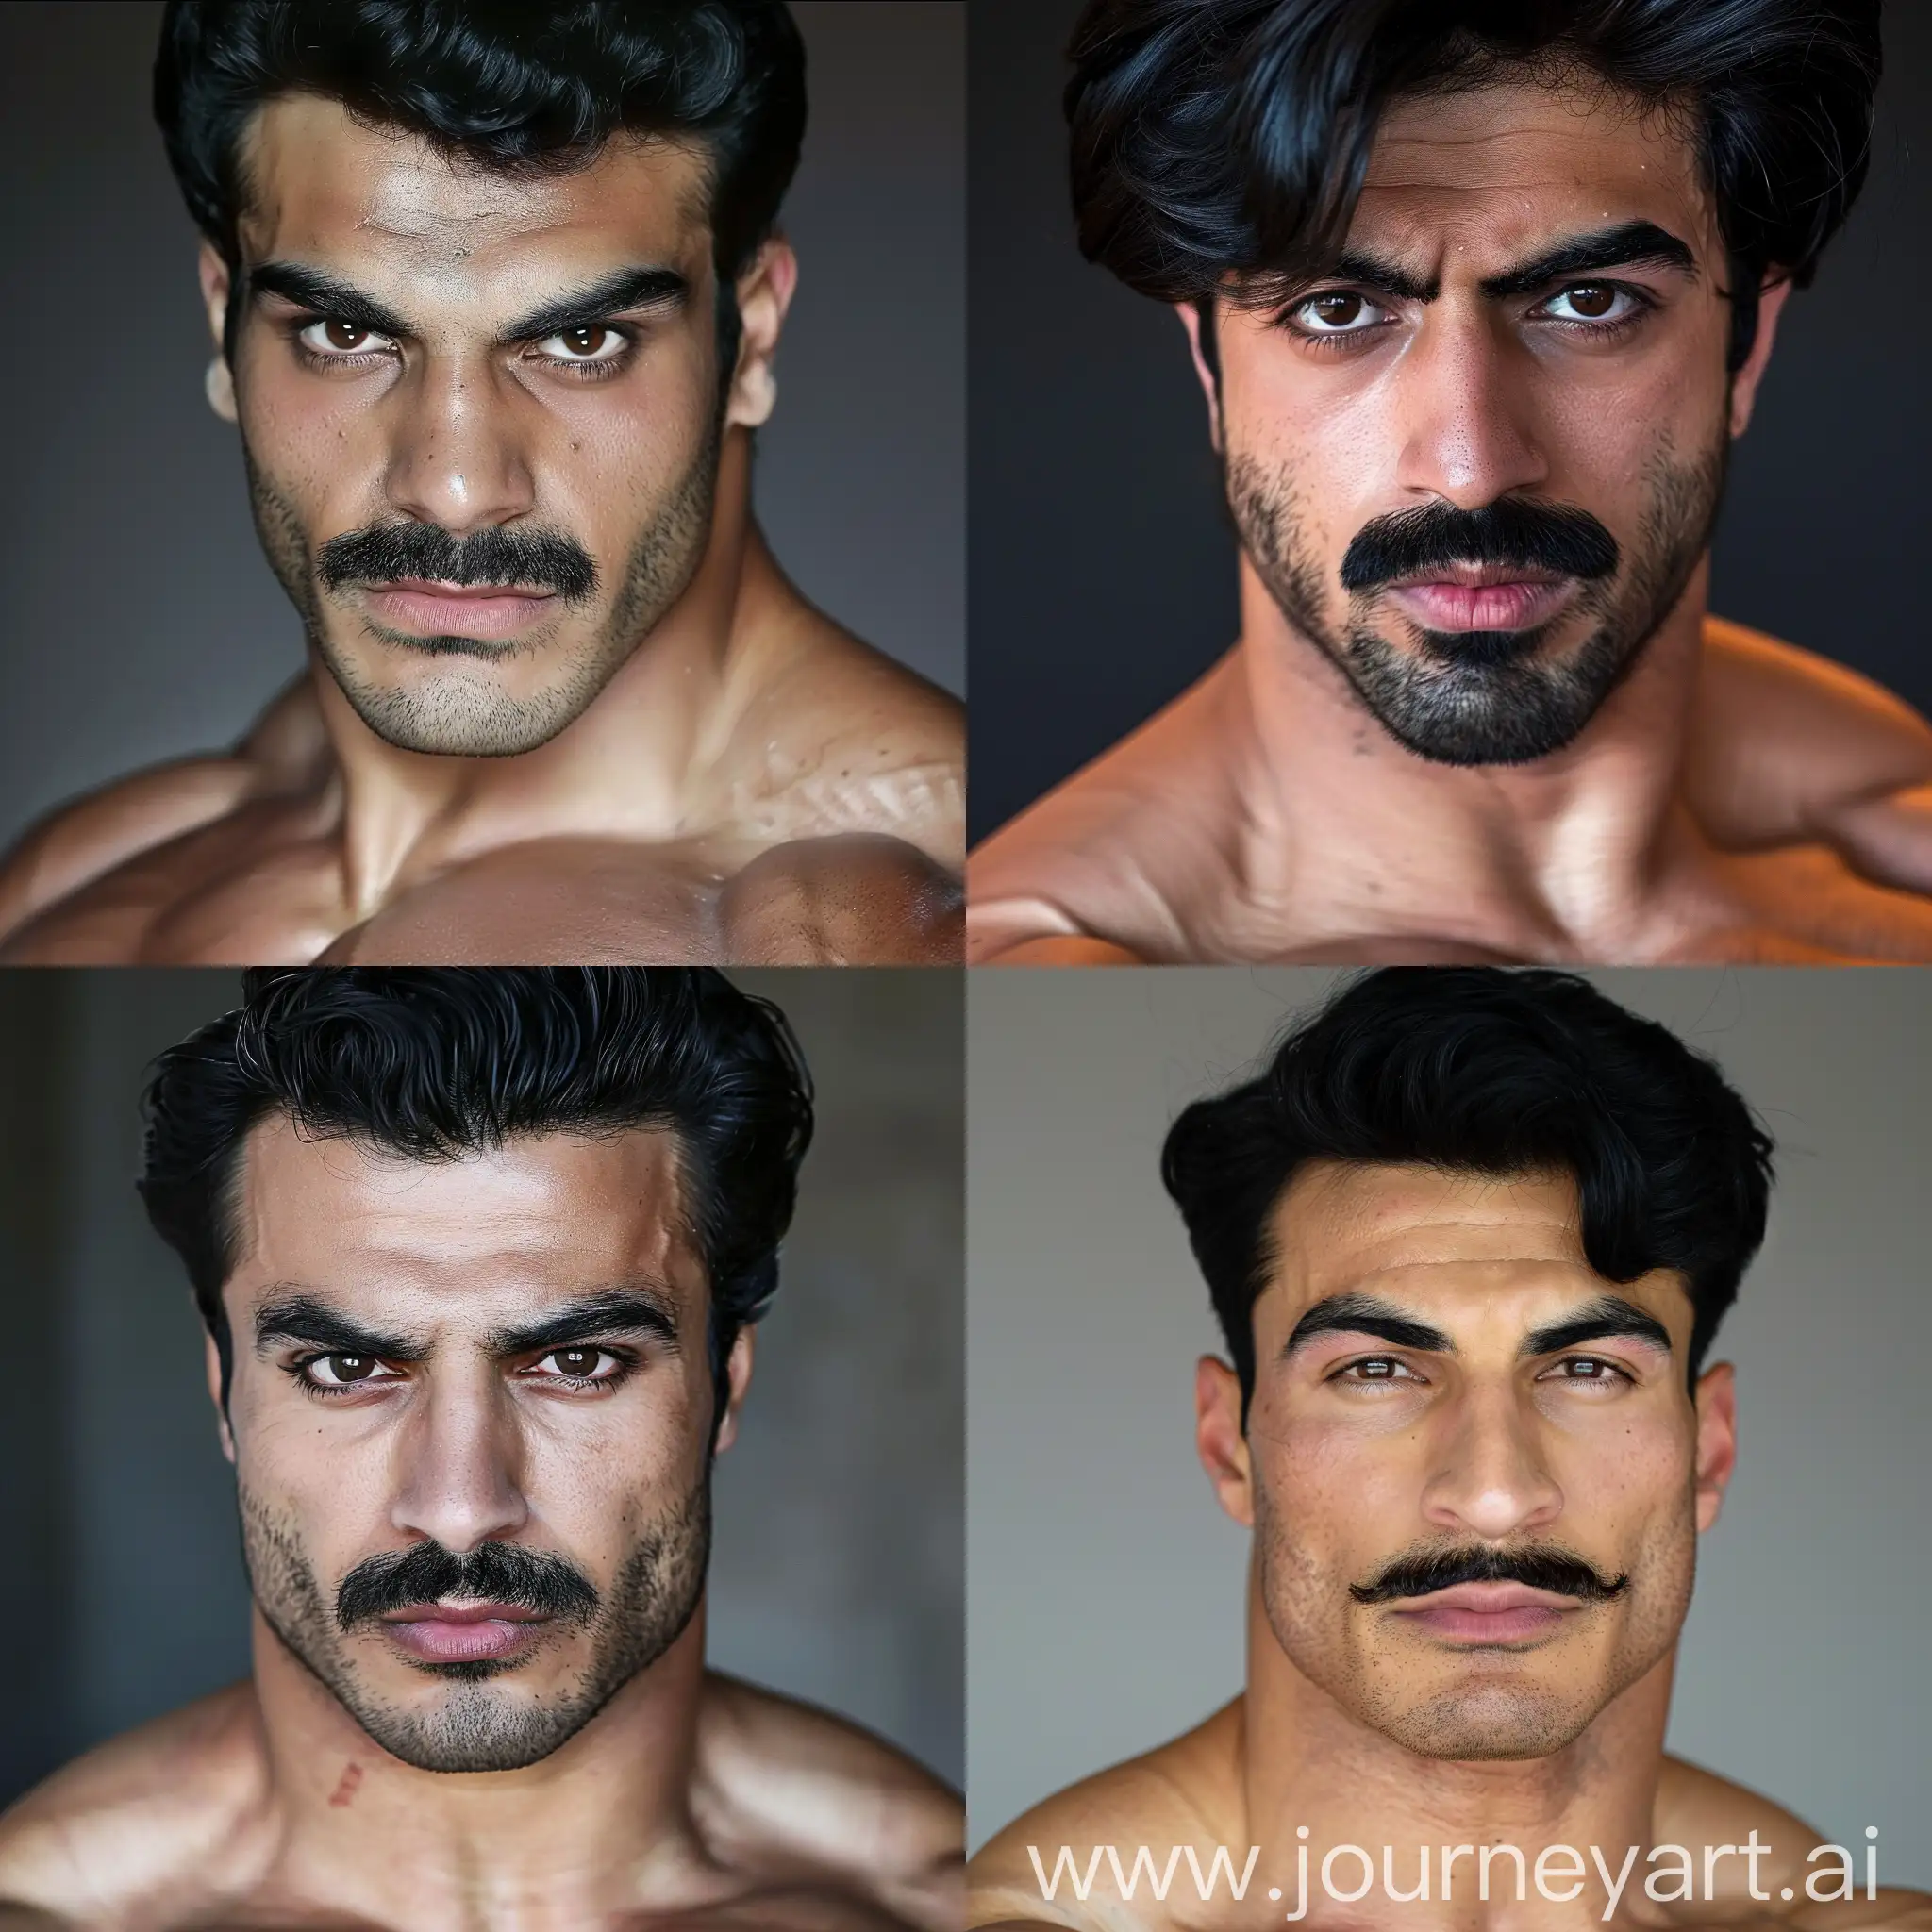 Muscular-Iranian-Bodybuilder-with-Tanned-Skin-and-Mustache